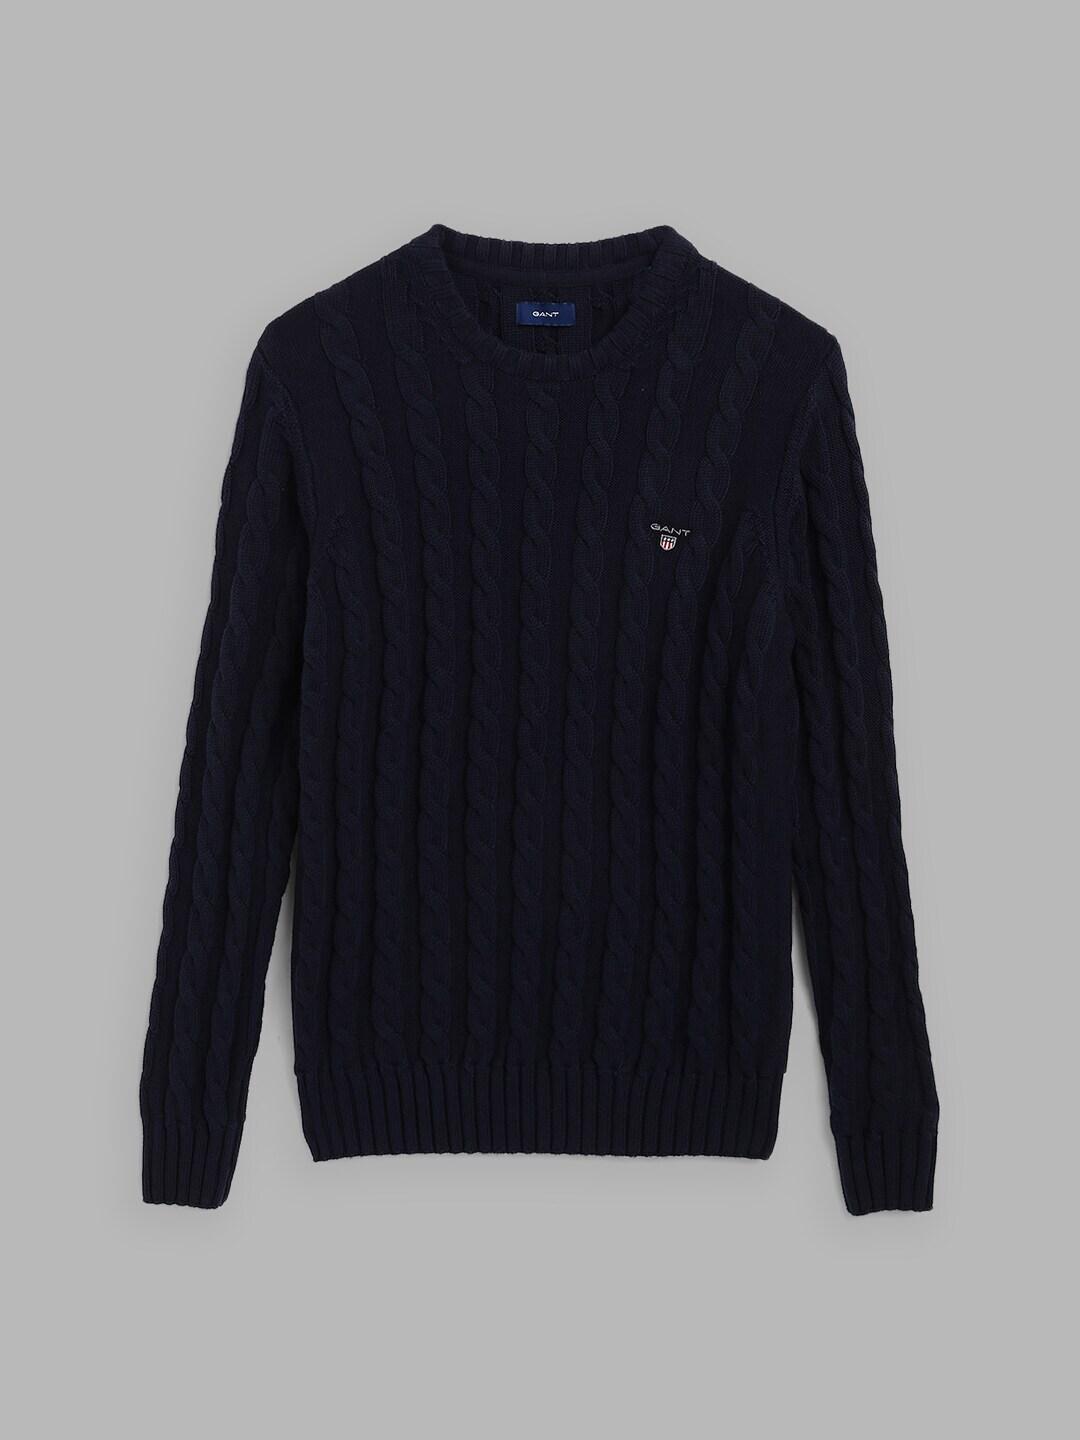 GANT Boys Navy Blue Cable Knit Pullover Sweater